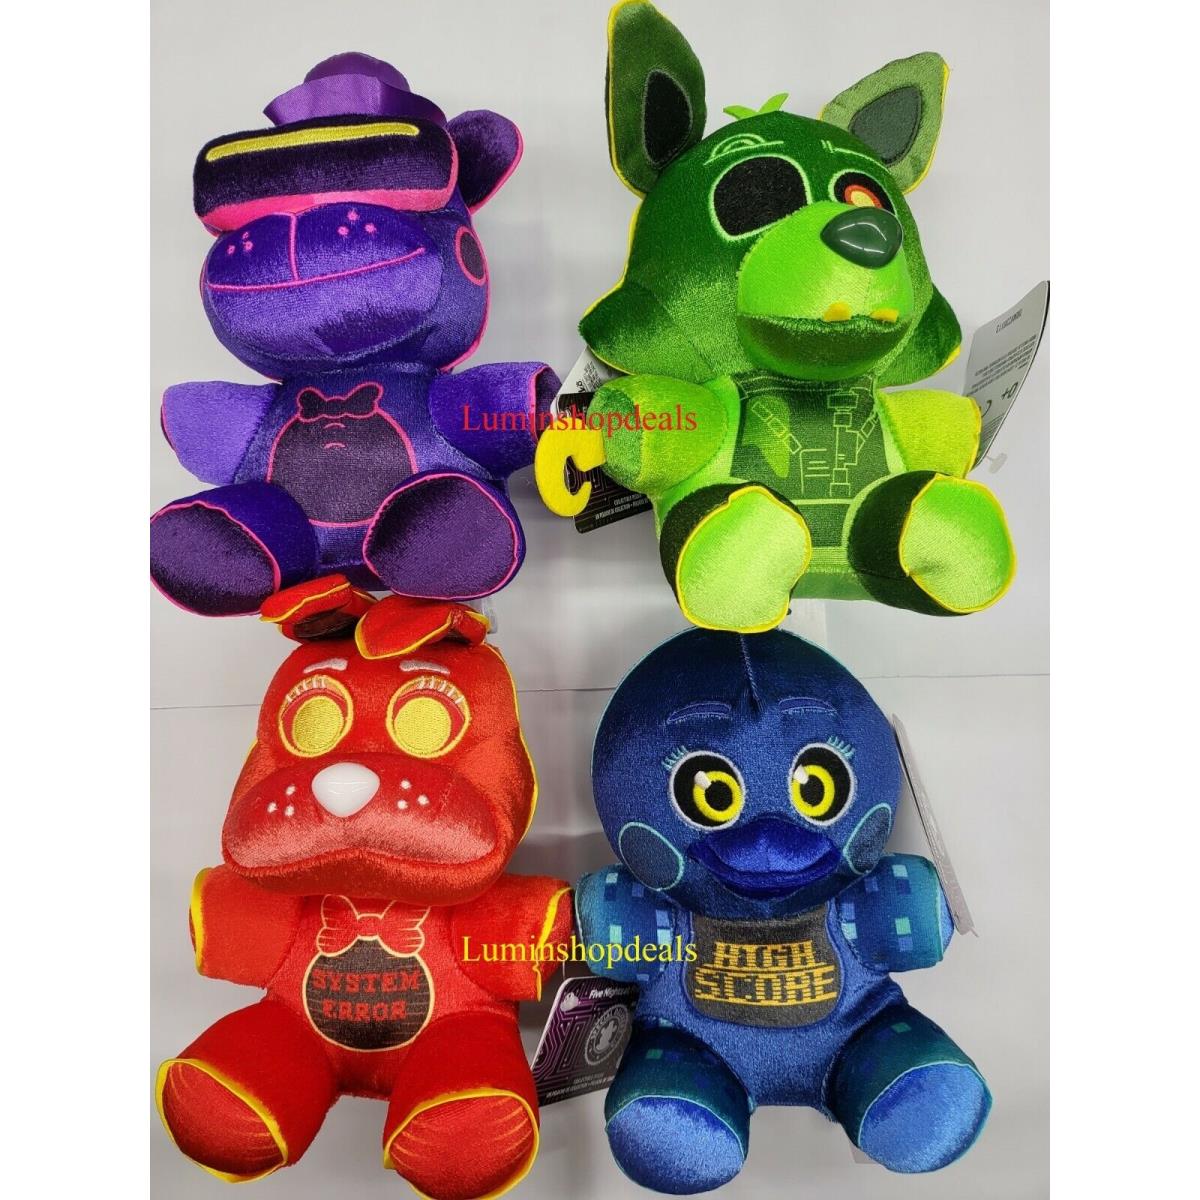 Funko Plush Five Nights at Freddy`s Fnaf S7 Plush 7 Inches Collect Set 4 Pcs - Red